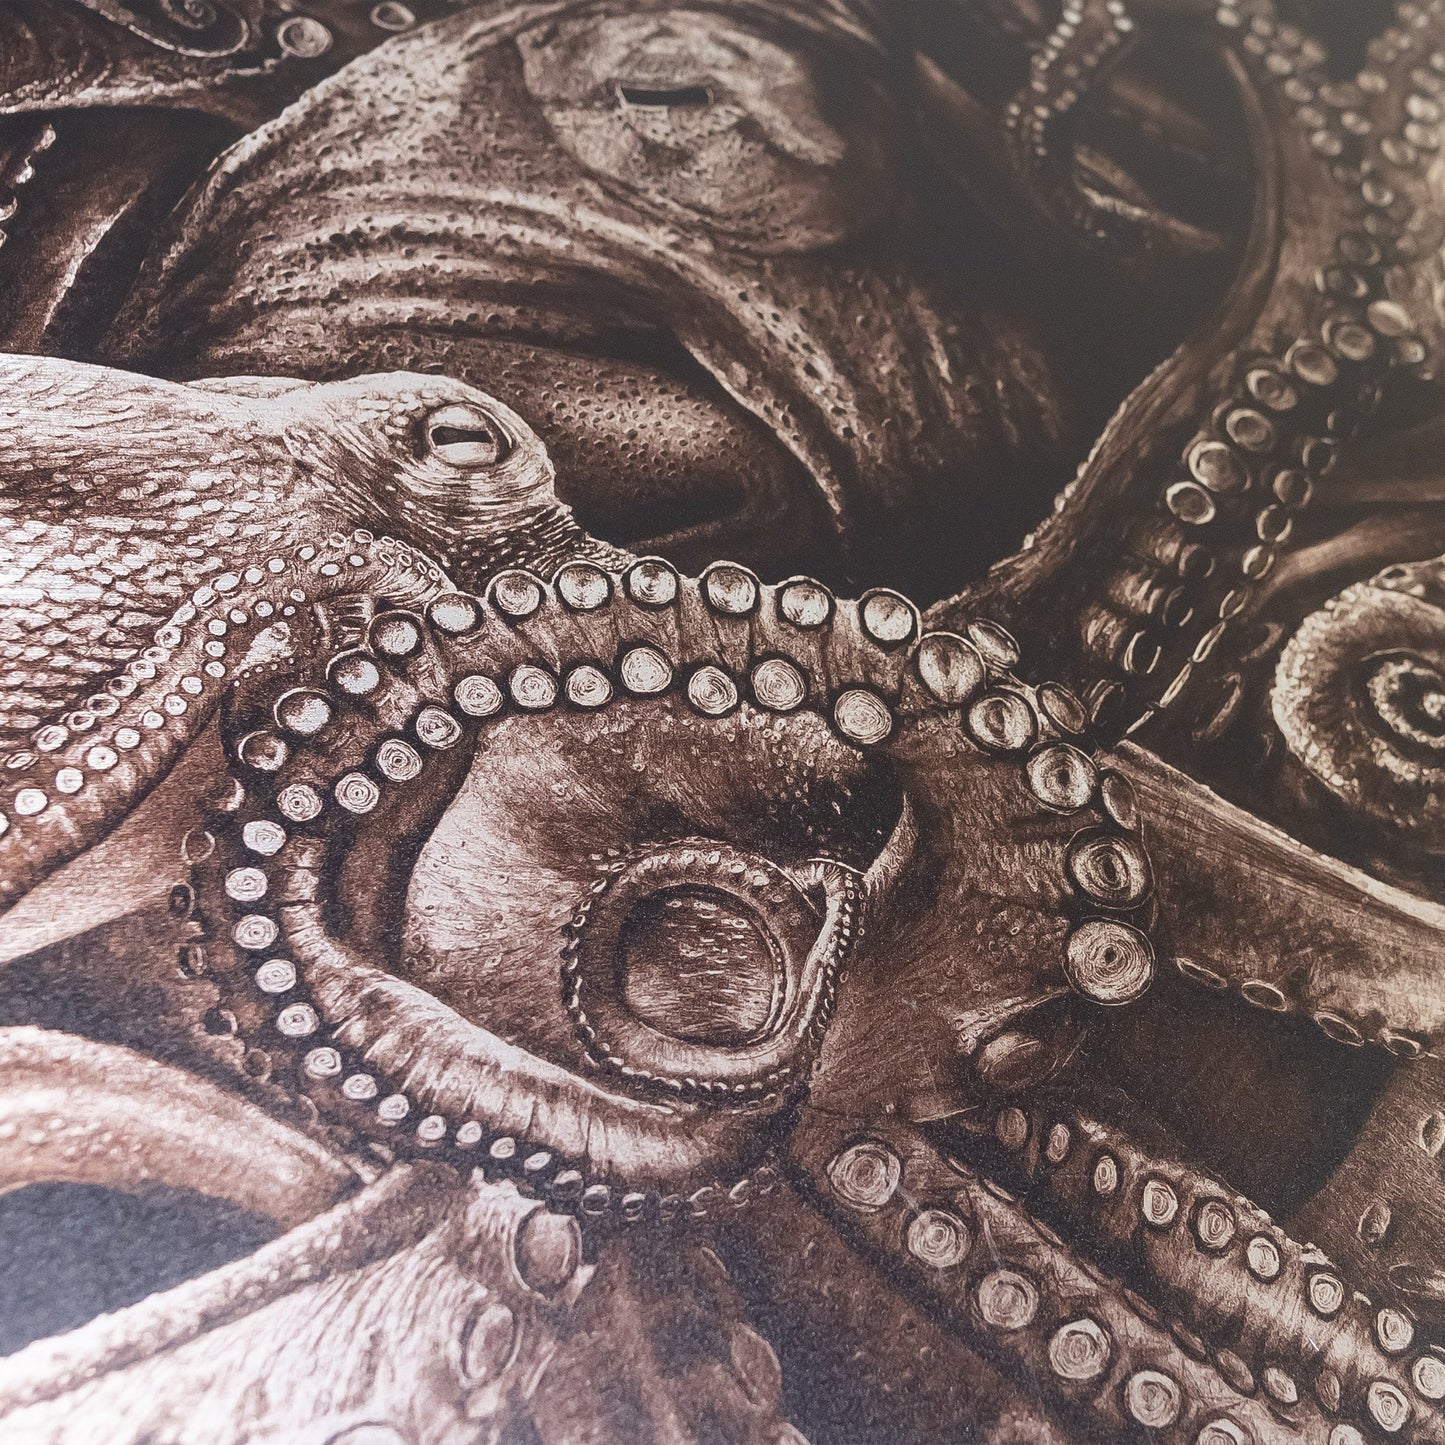 METAL Octopus Planet - LIMITED EDITION METAL PRINT (1 of 3) - Danny Branscombe